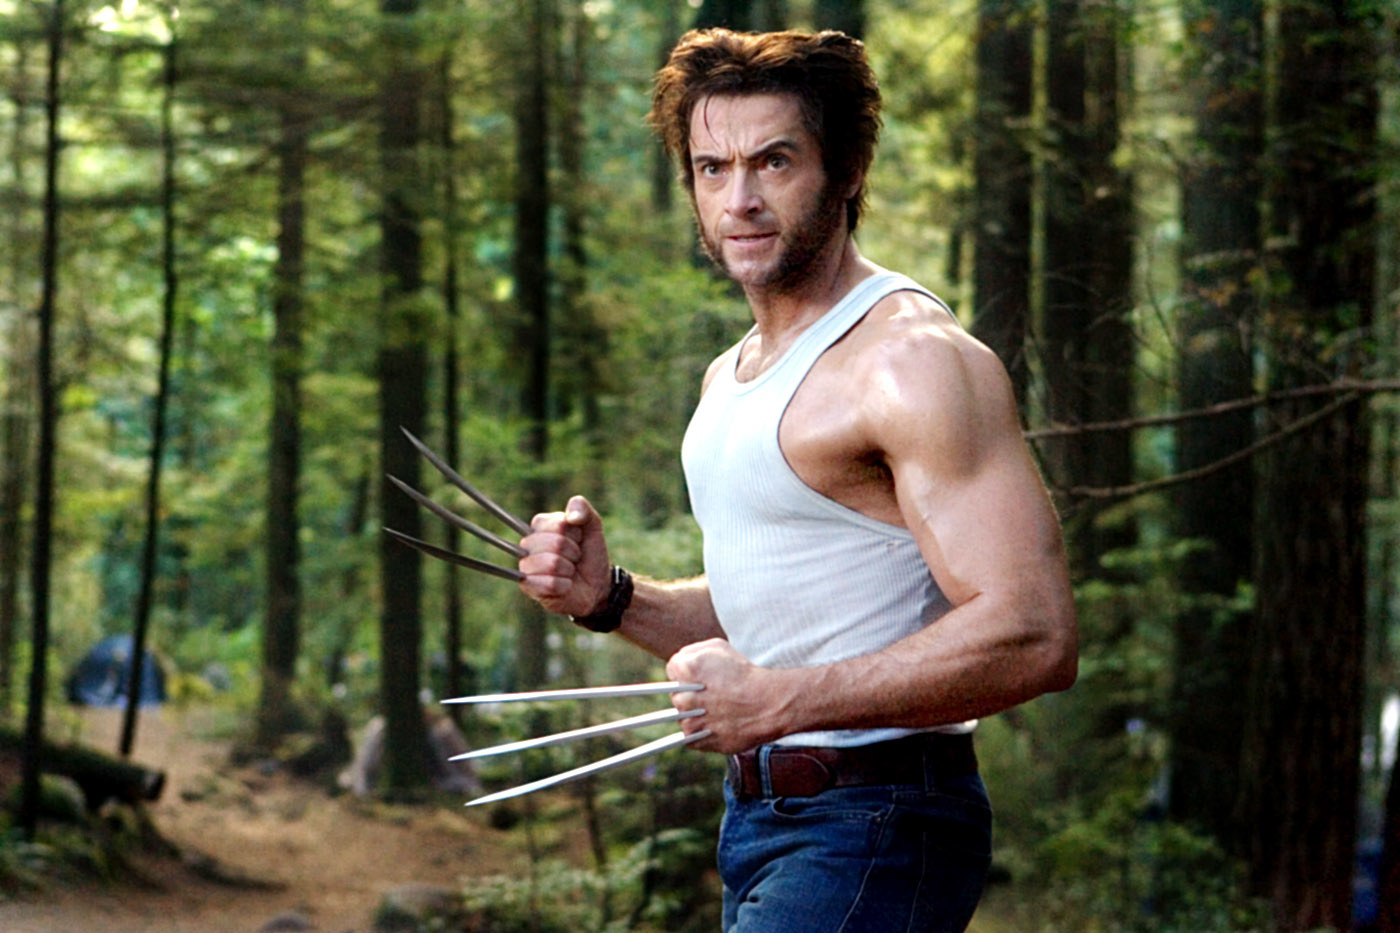 Hugh Jackman poses with his Wolverine claws out, prepared to fight